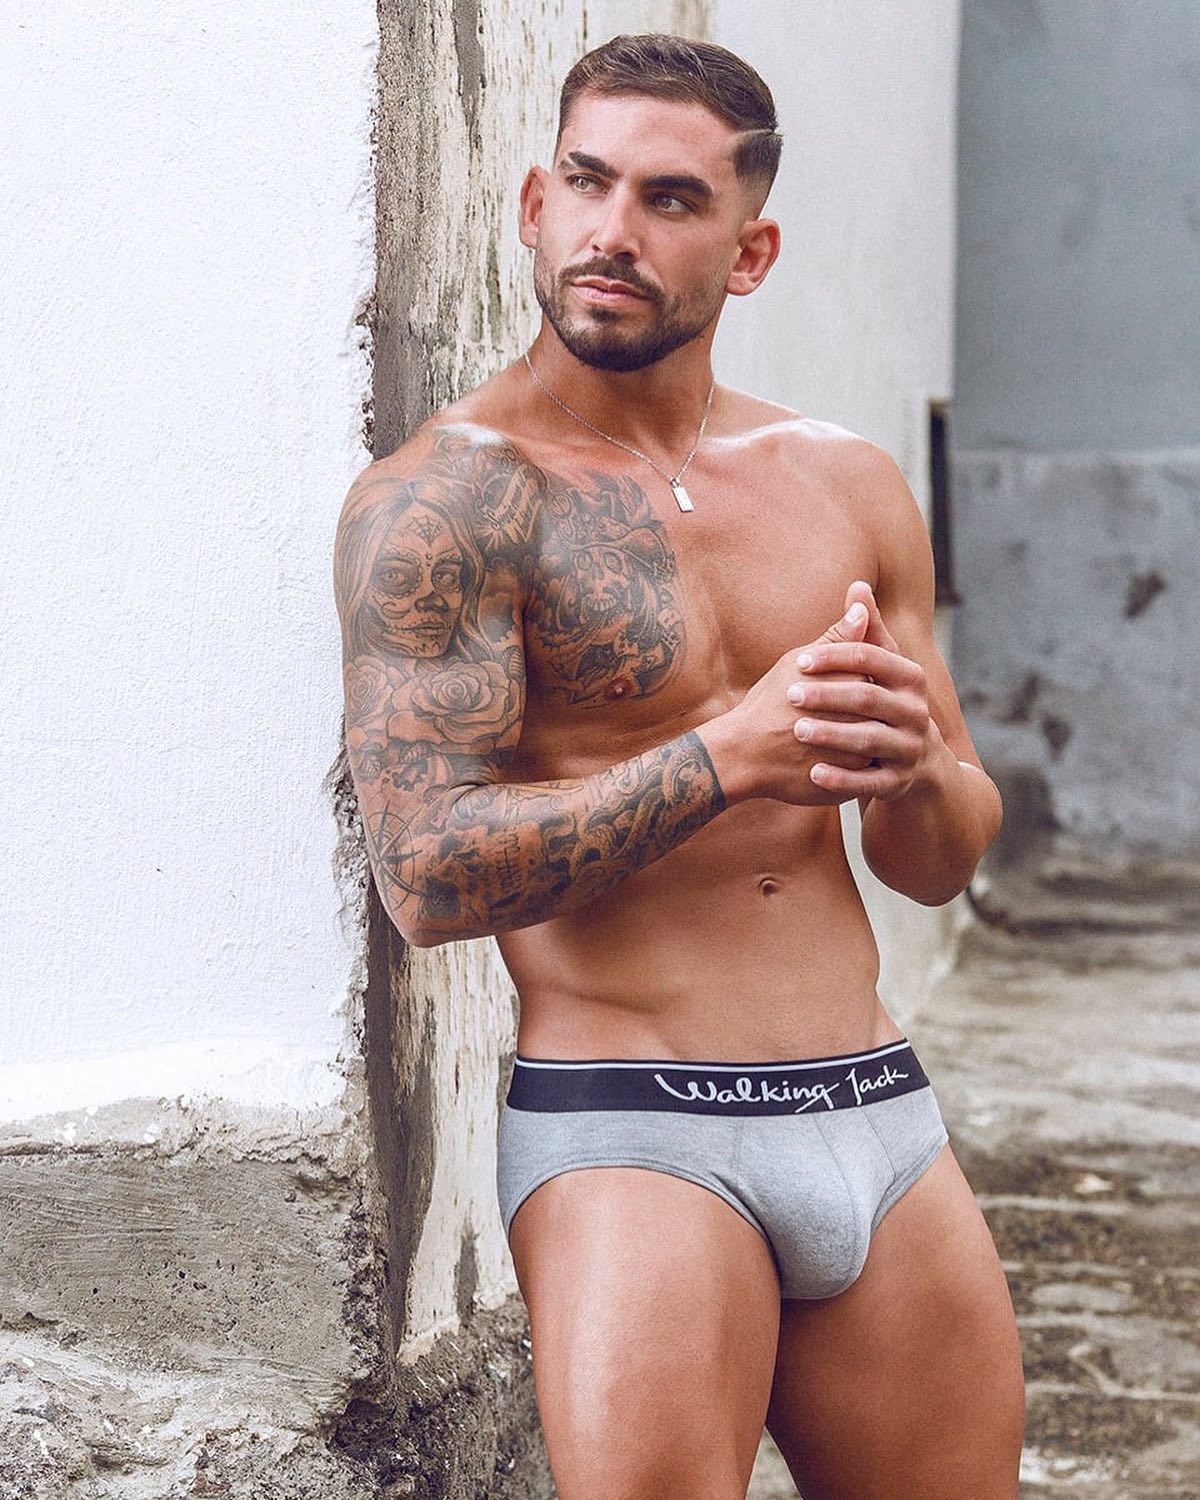 The latest work of Adrian C. Martin features underwear by Walking Jack on model Alejandro. See more:
____
http://www.menandunderwear.com/2022/01/model-alejandro-by-adrian-c-martin-walking-jack-underwear.html